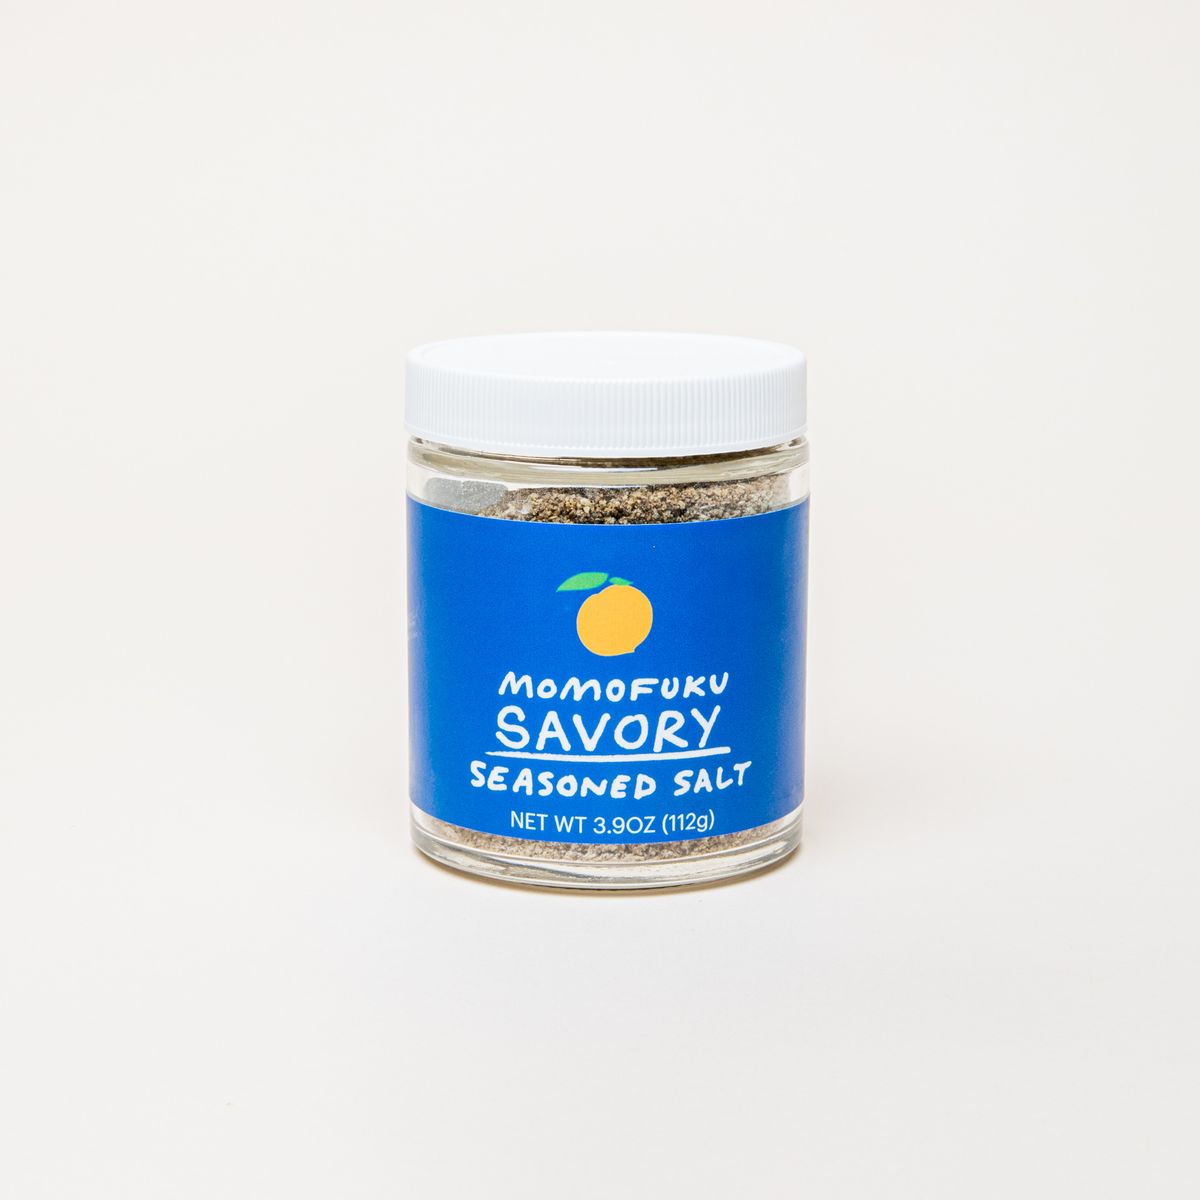 A jar with a white top and blue label that reads "Momofuku Savory Seasoned Salt"